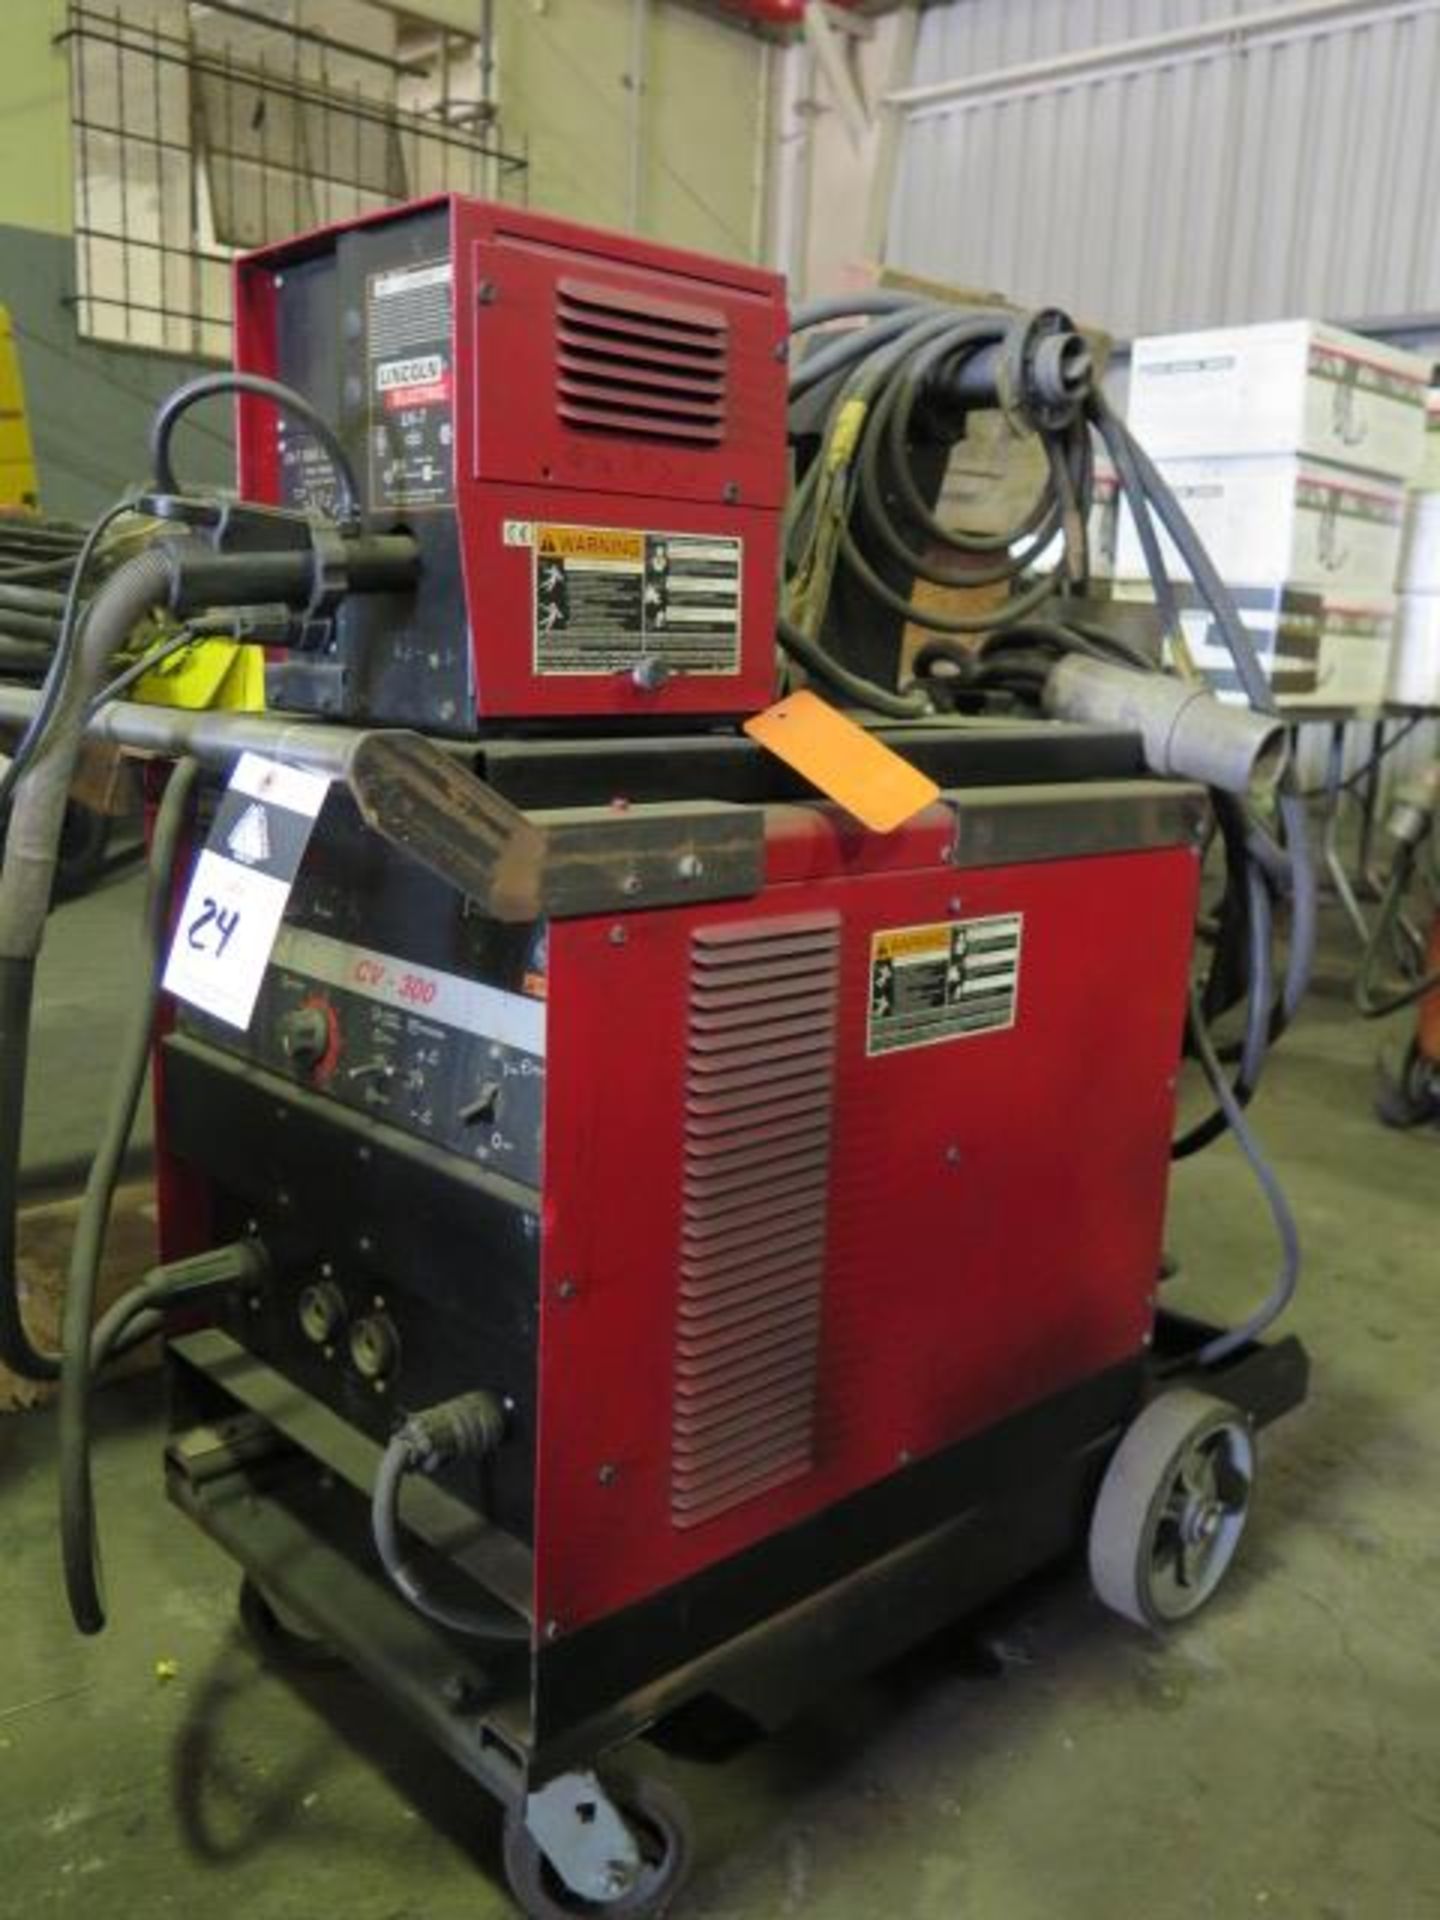 Lincoln CV-300 Arc Welding Power Source w/ Lincoln LN-7 Wire Feed (SOLD AS-IS - NO WARRANTY) - Image 2 of 7